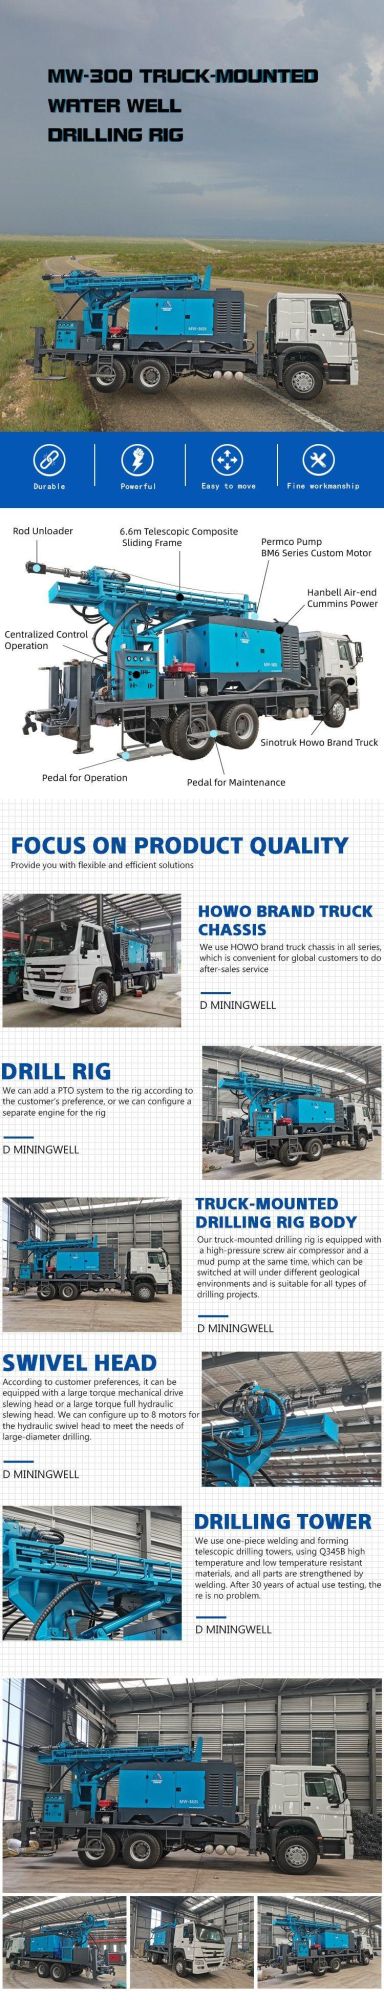 Dminingwell 450m Truck Mounted Water Well Drilling Rig with Option Chassis for Sale